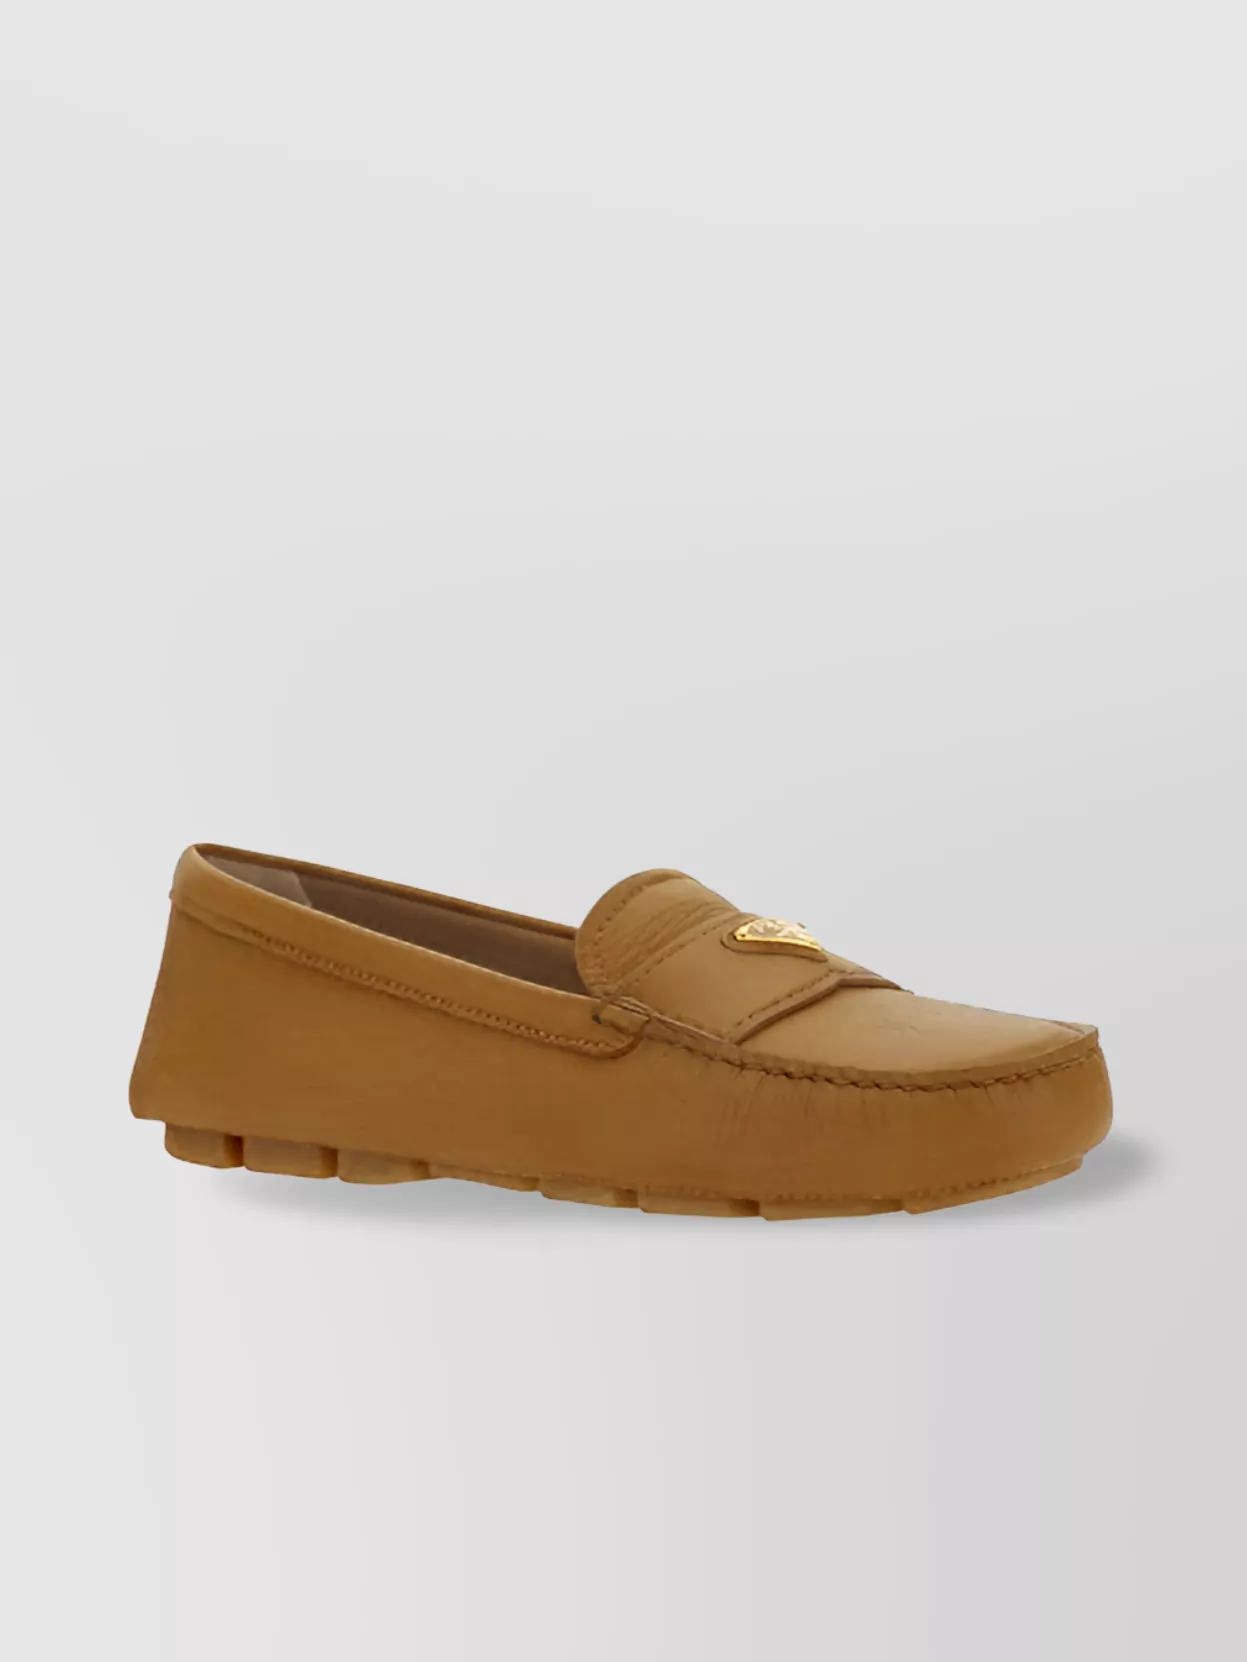 Prada Calfskin Loafers With Iconic Triangle Detail